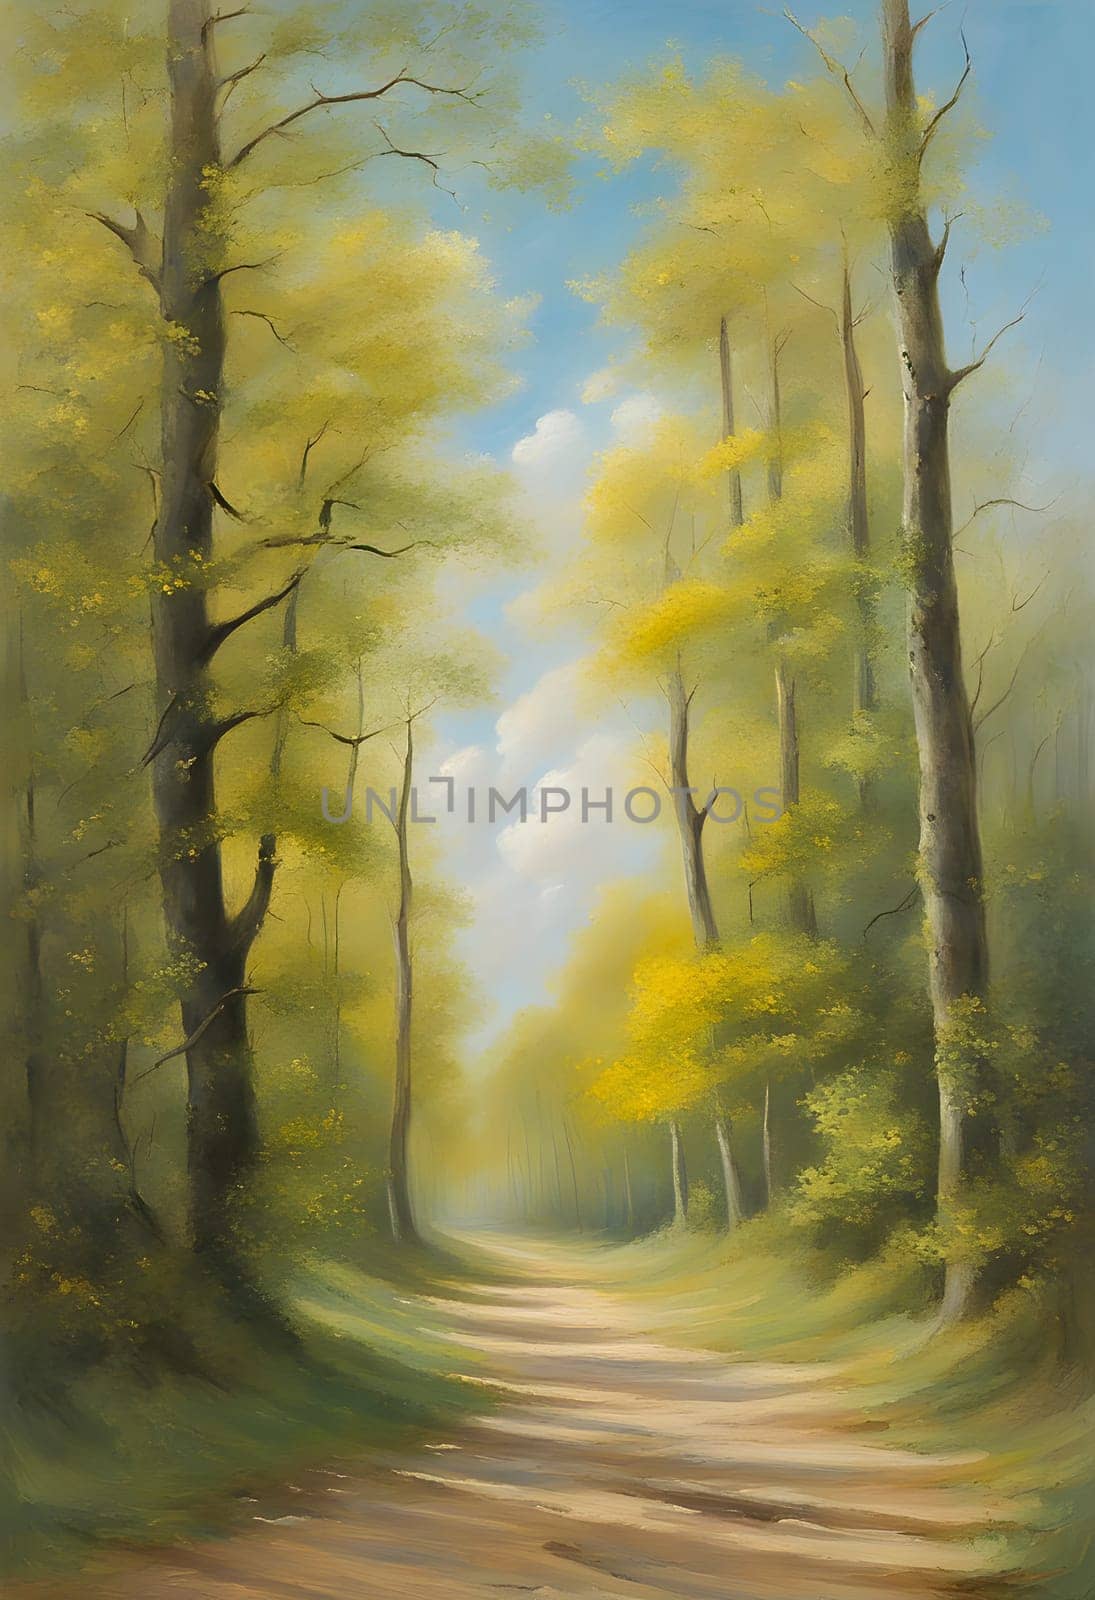 The picture shows an oil painting of a path in the forest. The road is dusty and leads through the trees. The trees are green and some of them have yellow leaves. The sky is blue with a few clouds. by rostik924